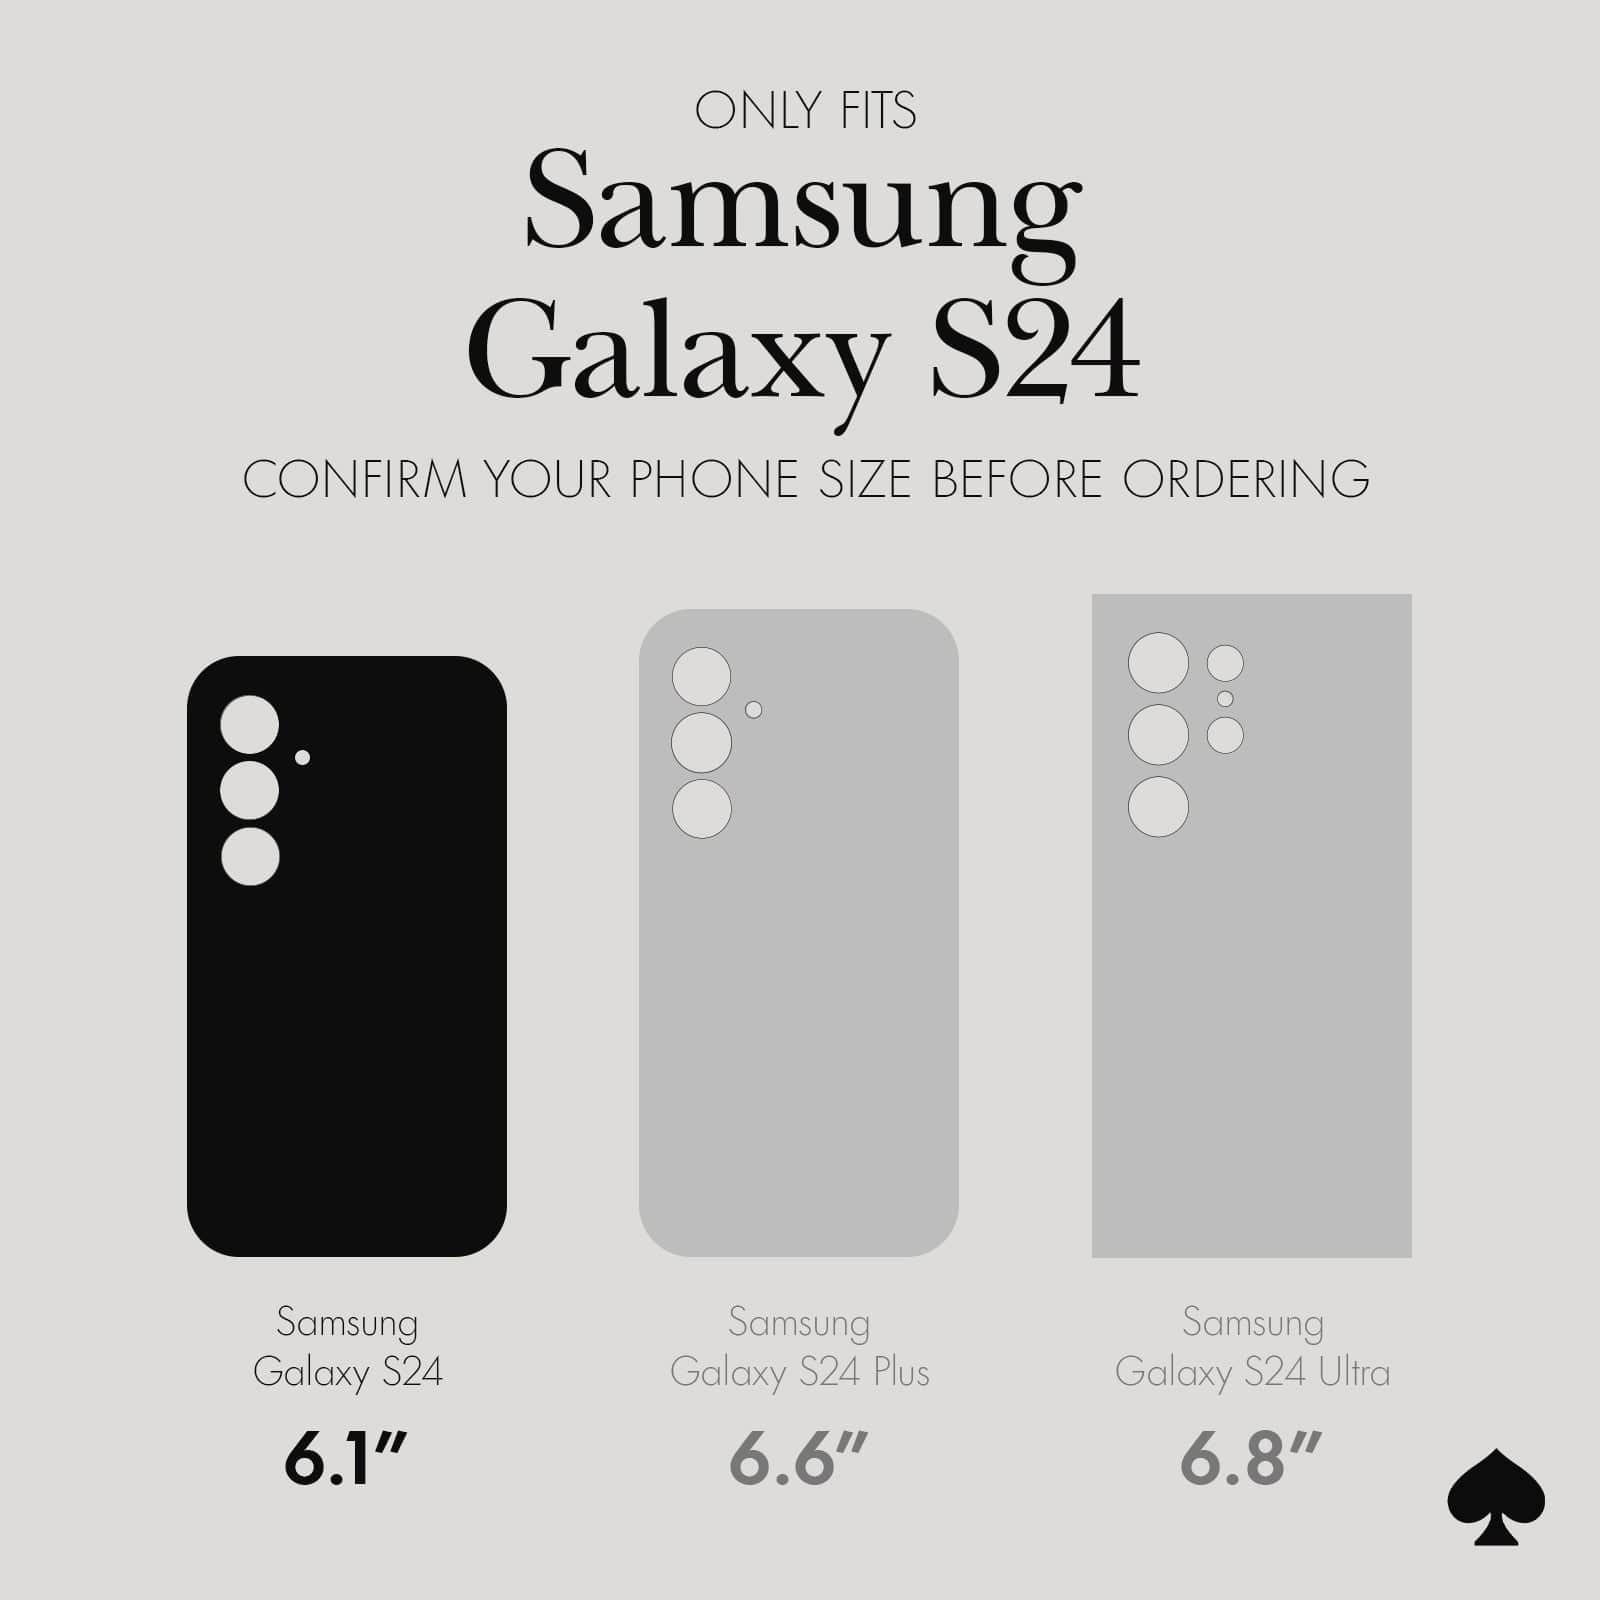 ONLY FITS SAMSUNG GALAXY S24 CONFIRM YOUR PHONE SIZE BEFORE ORDERING